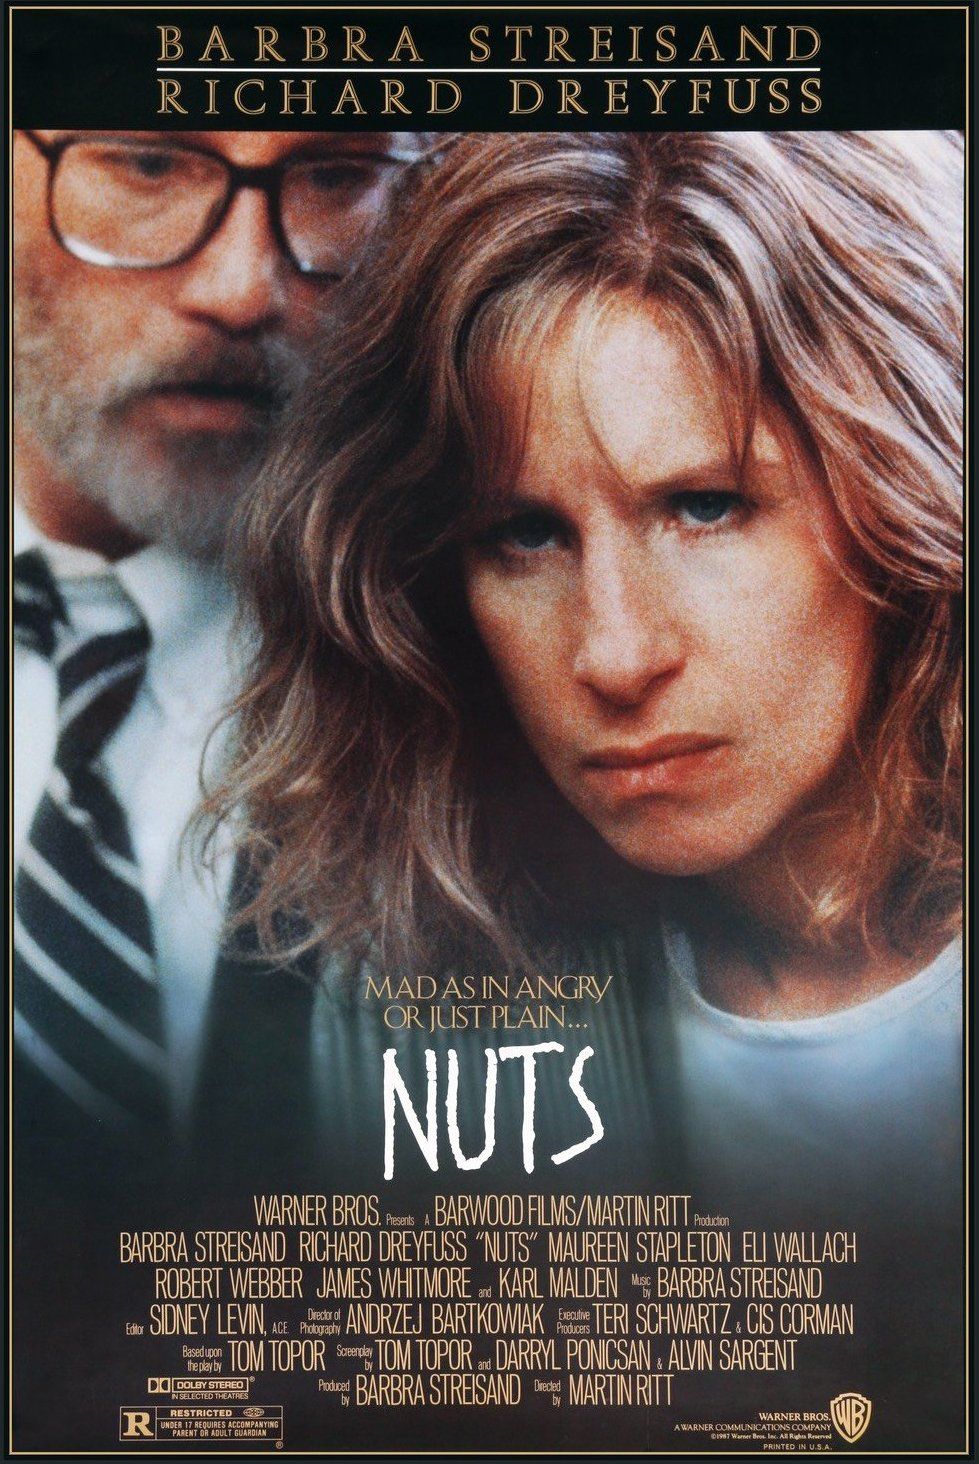 NUTS U.S. theatrical poster.